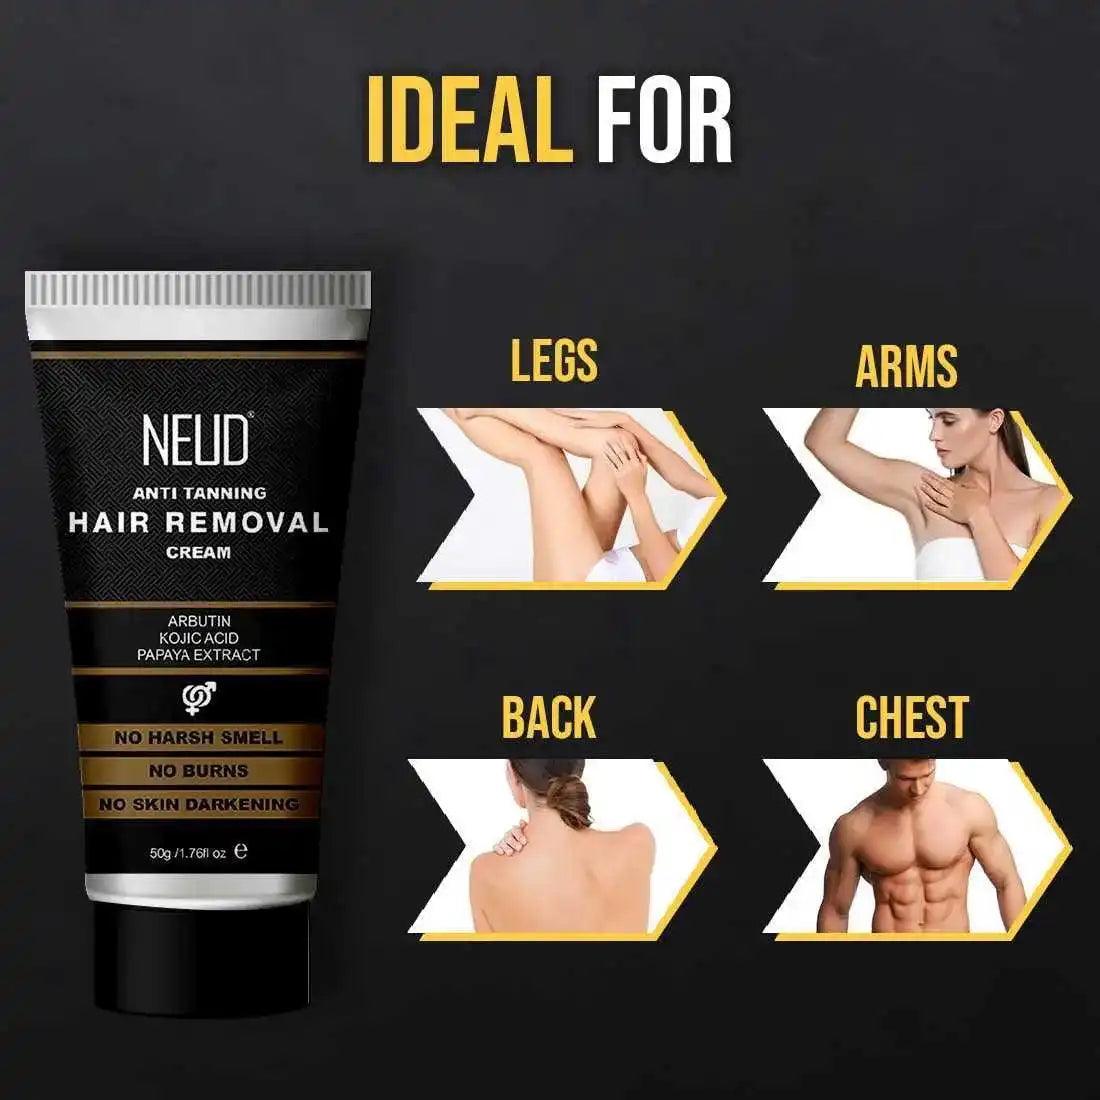 NEUD Anti-Tanning Hair Removal Cream is Ideal for Arms, Legs, Chest and Back in Men and Women - everteen-neud.com